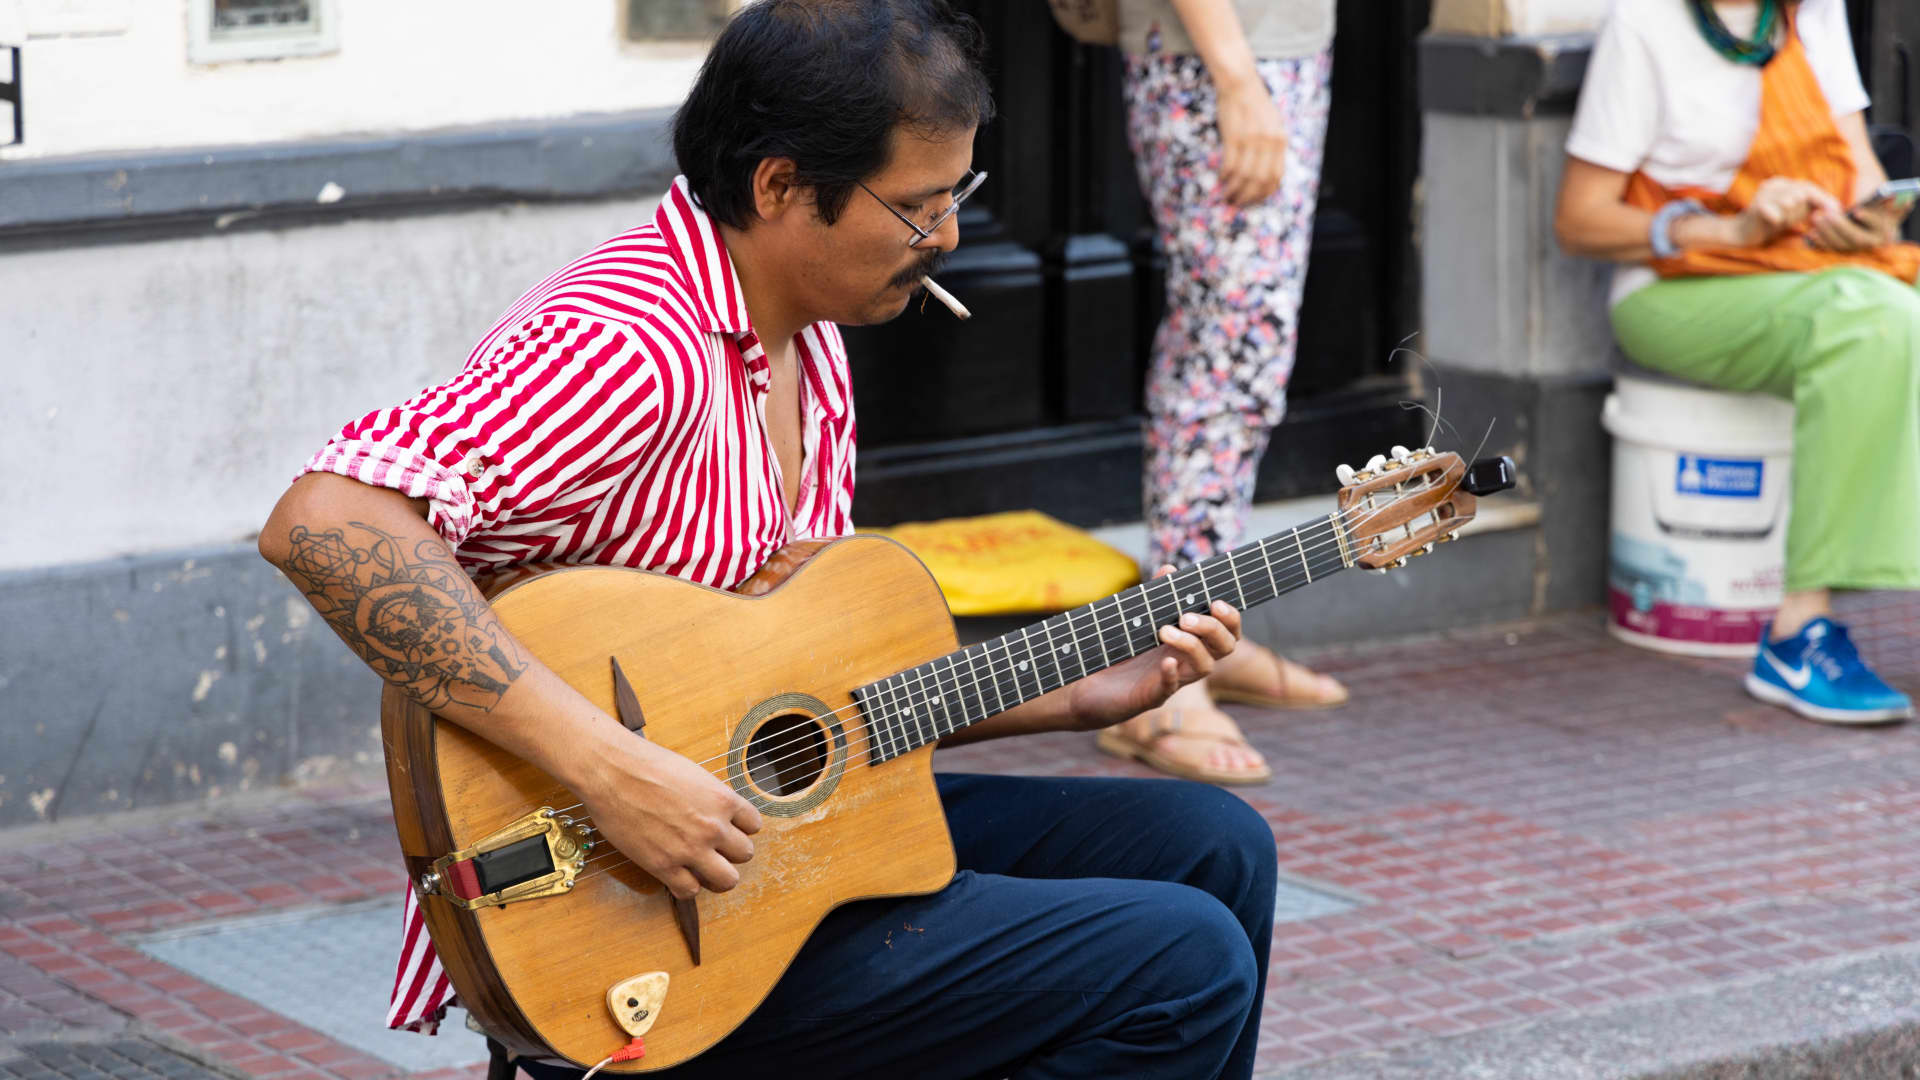 A guitar player in the San Telmo neighborhood of Buenos Aires.